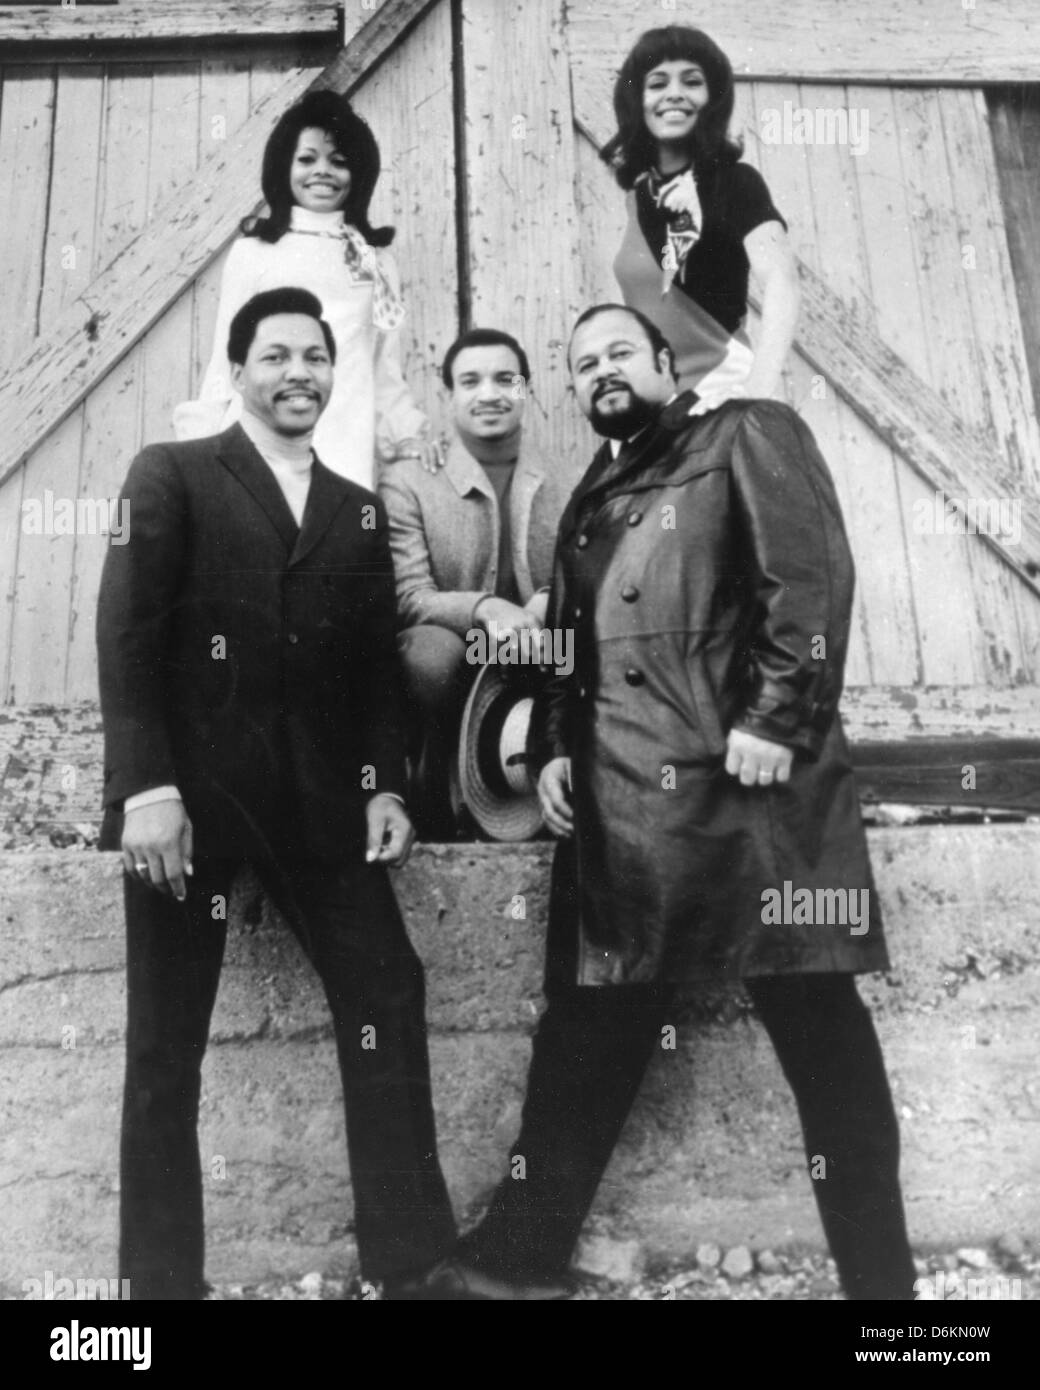 5th DIMENSION  Promotional photo of US vocal group about 1967. See Description below for names Stock Photo